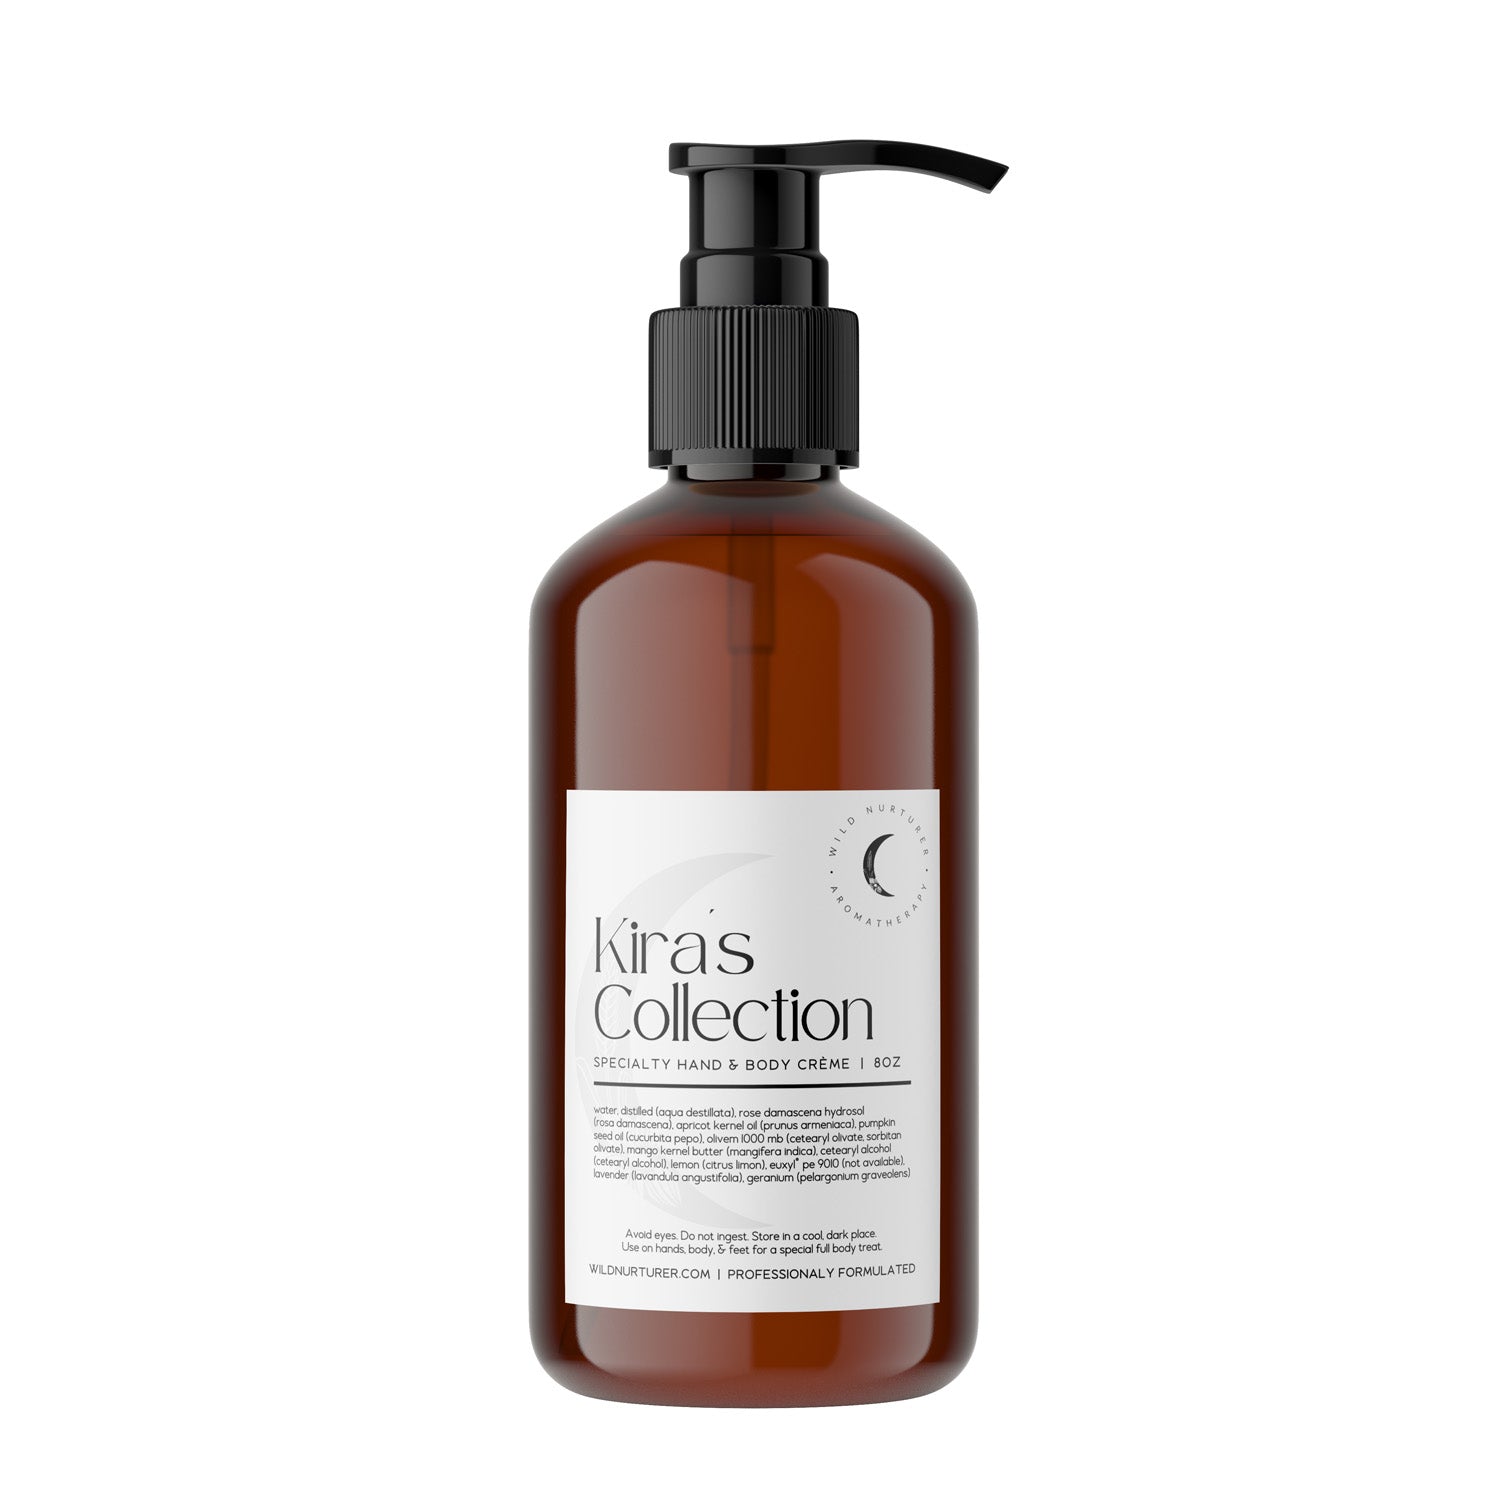 Brown bottle of Wild Nurturer Aromatherapy's Kira's Hand & Body Crème specialty hand soap with essential oil and a black pump, labeled in an elegant white font.